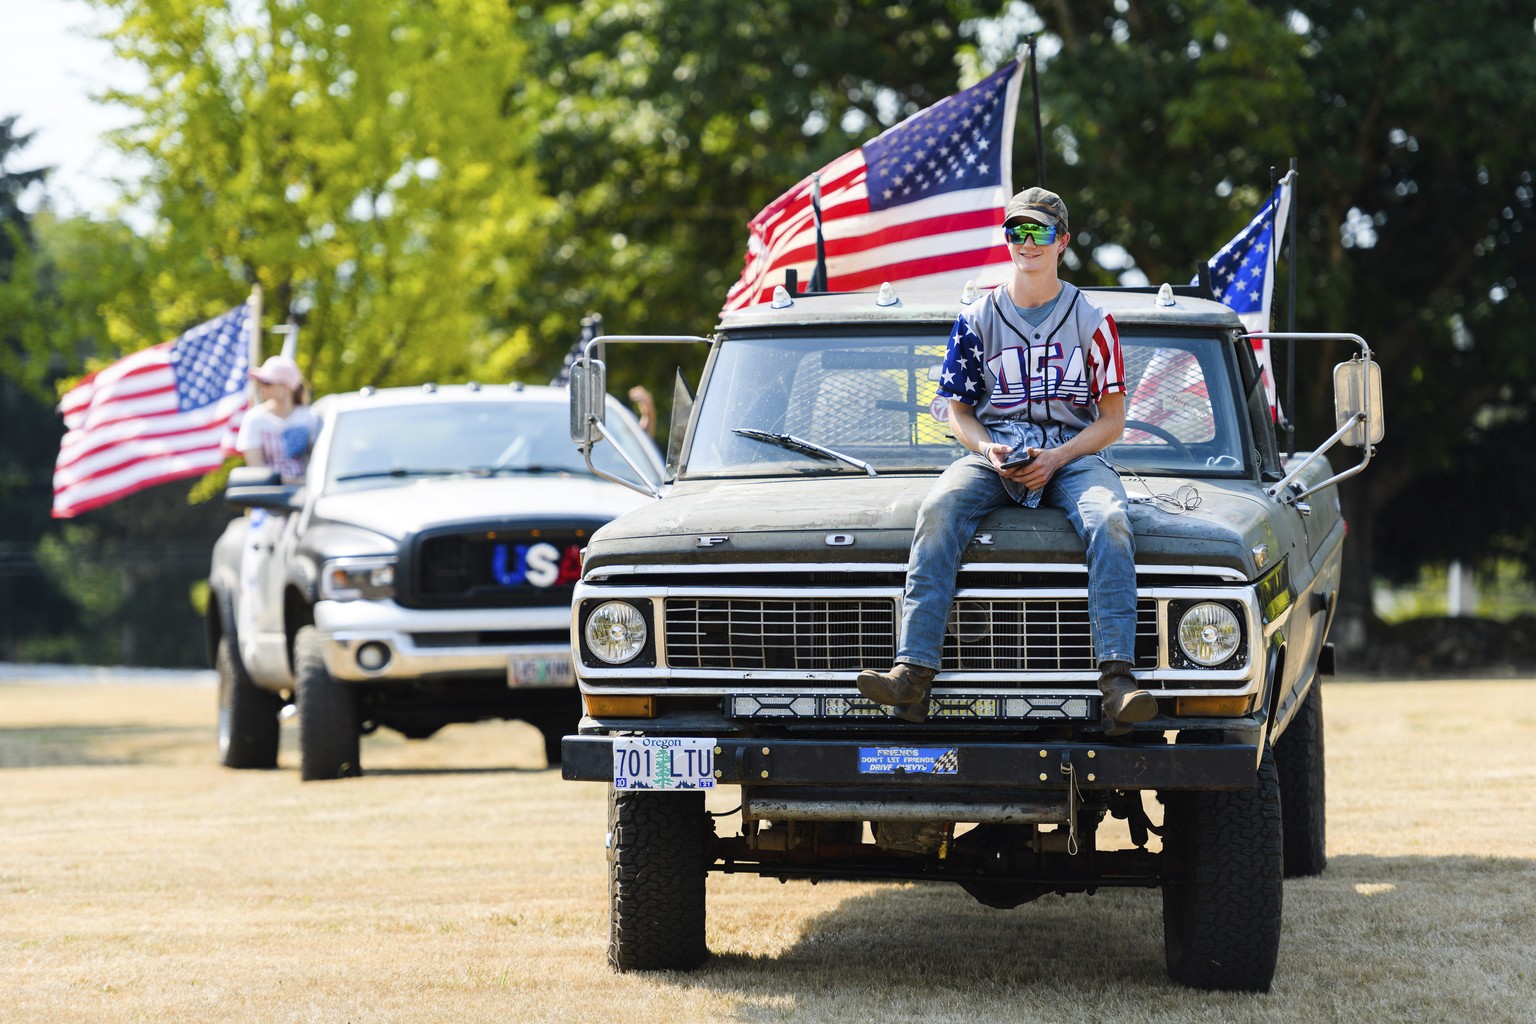 Riley Brumeister, 18, of Gresham, attends his first Trump rally atop the hood of his 1970 Ford F-250, at Clackamas Community College in Oregon City, Ore., Monday, Sept. 7, 2020. (AP Photo/Michael Arel ...